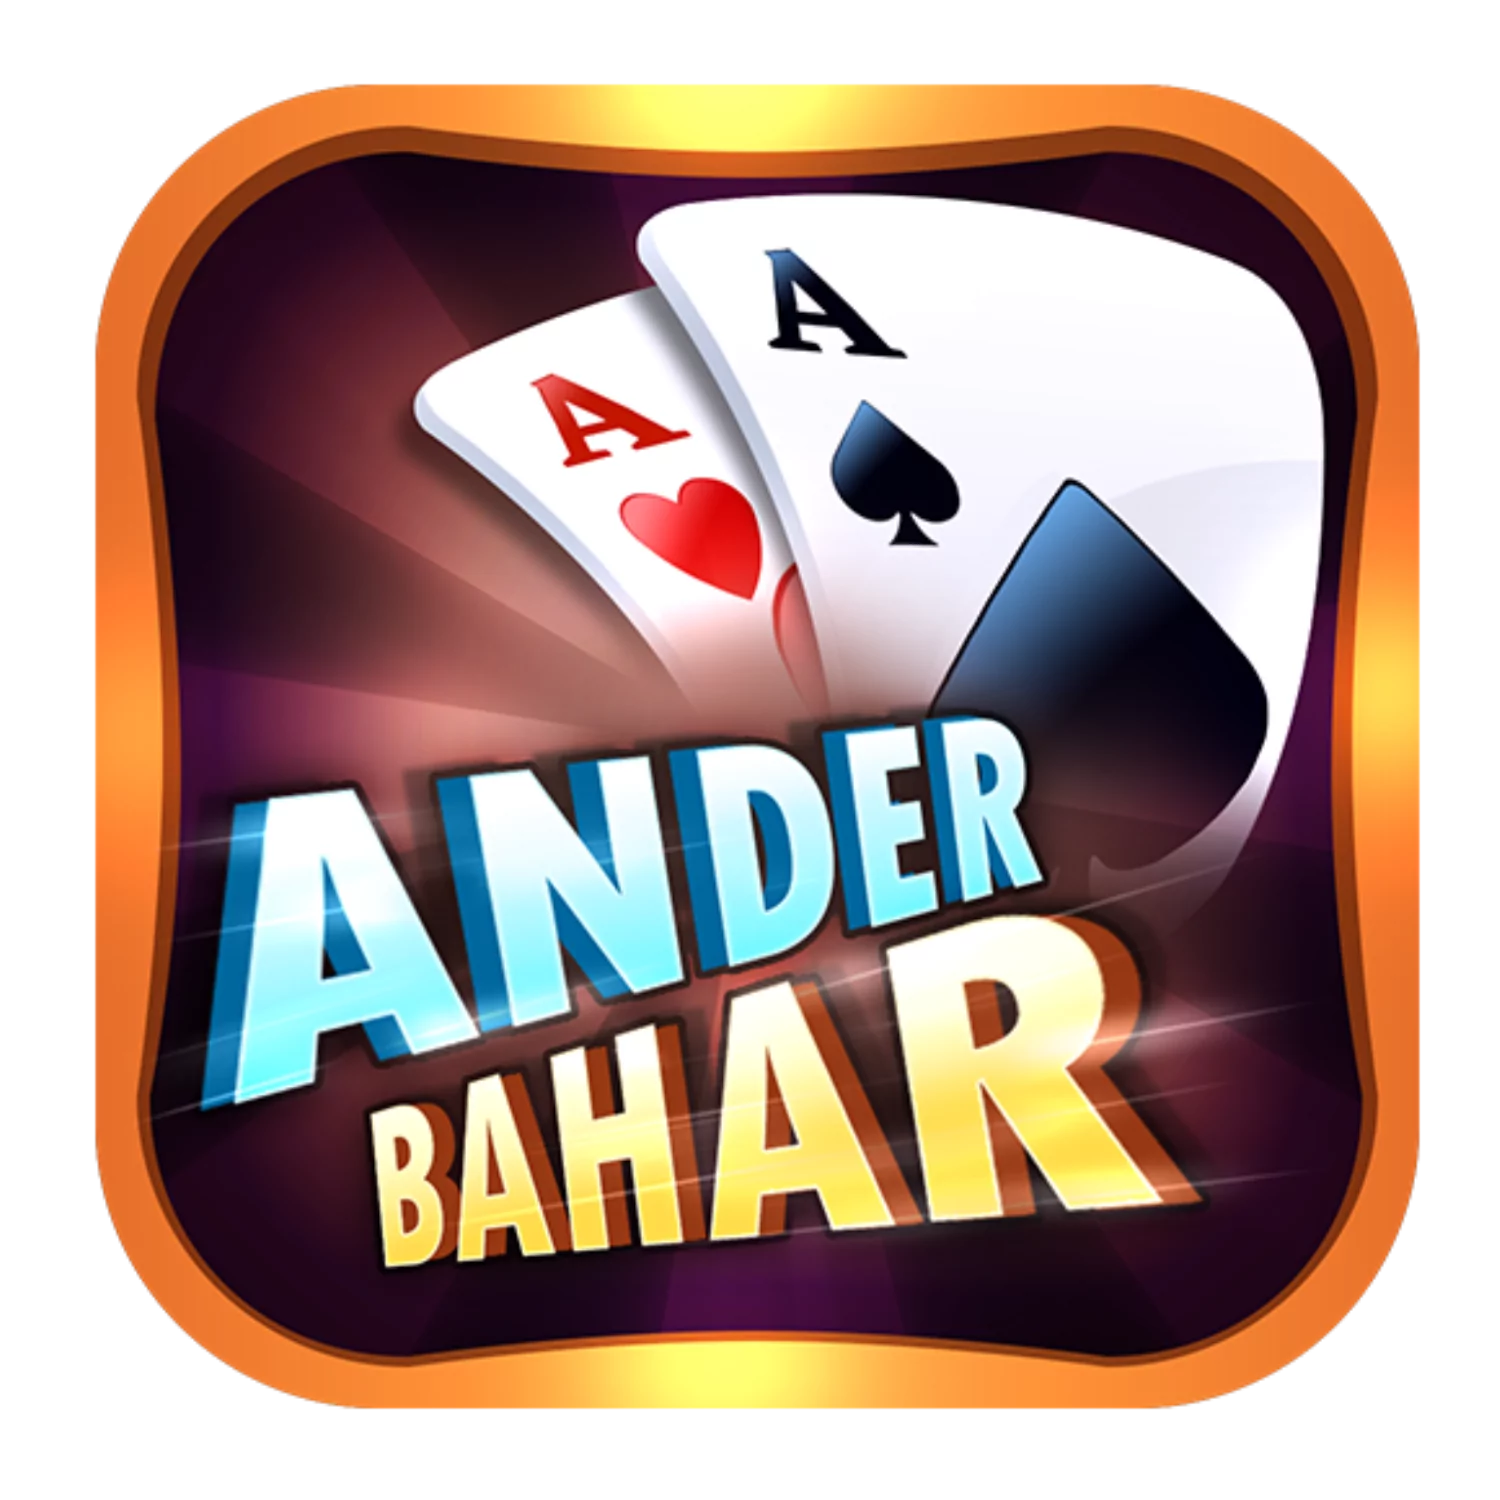 Play the most popular online casino game Andar Bahar.